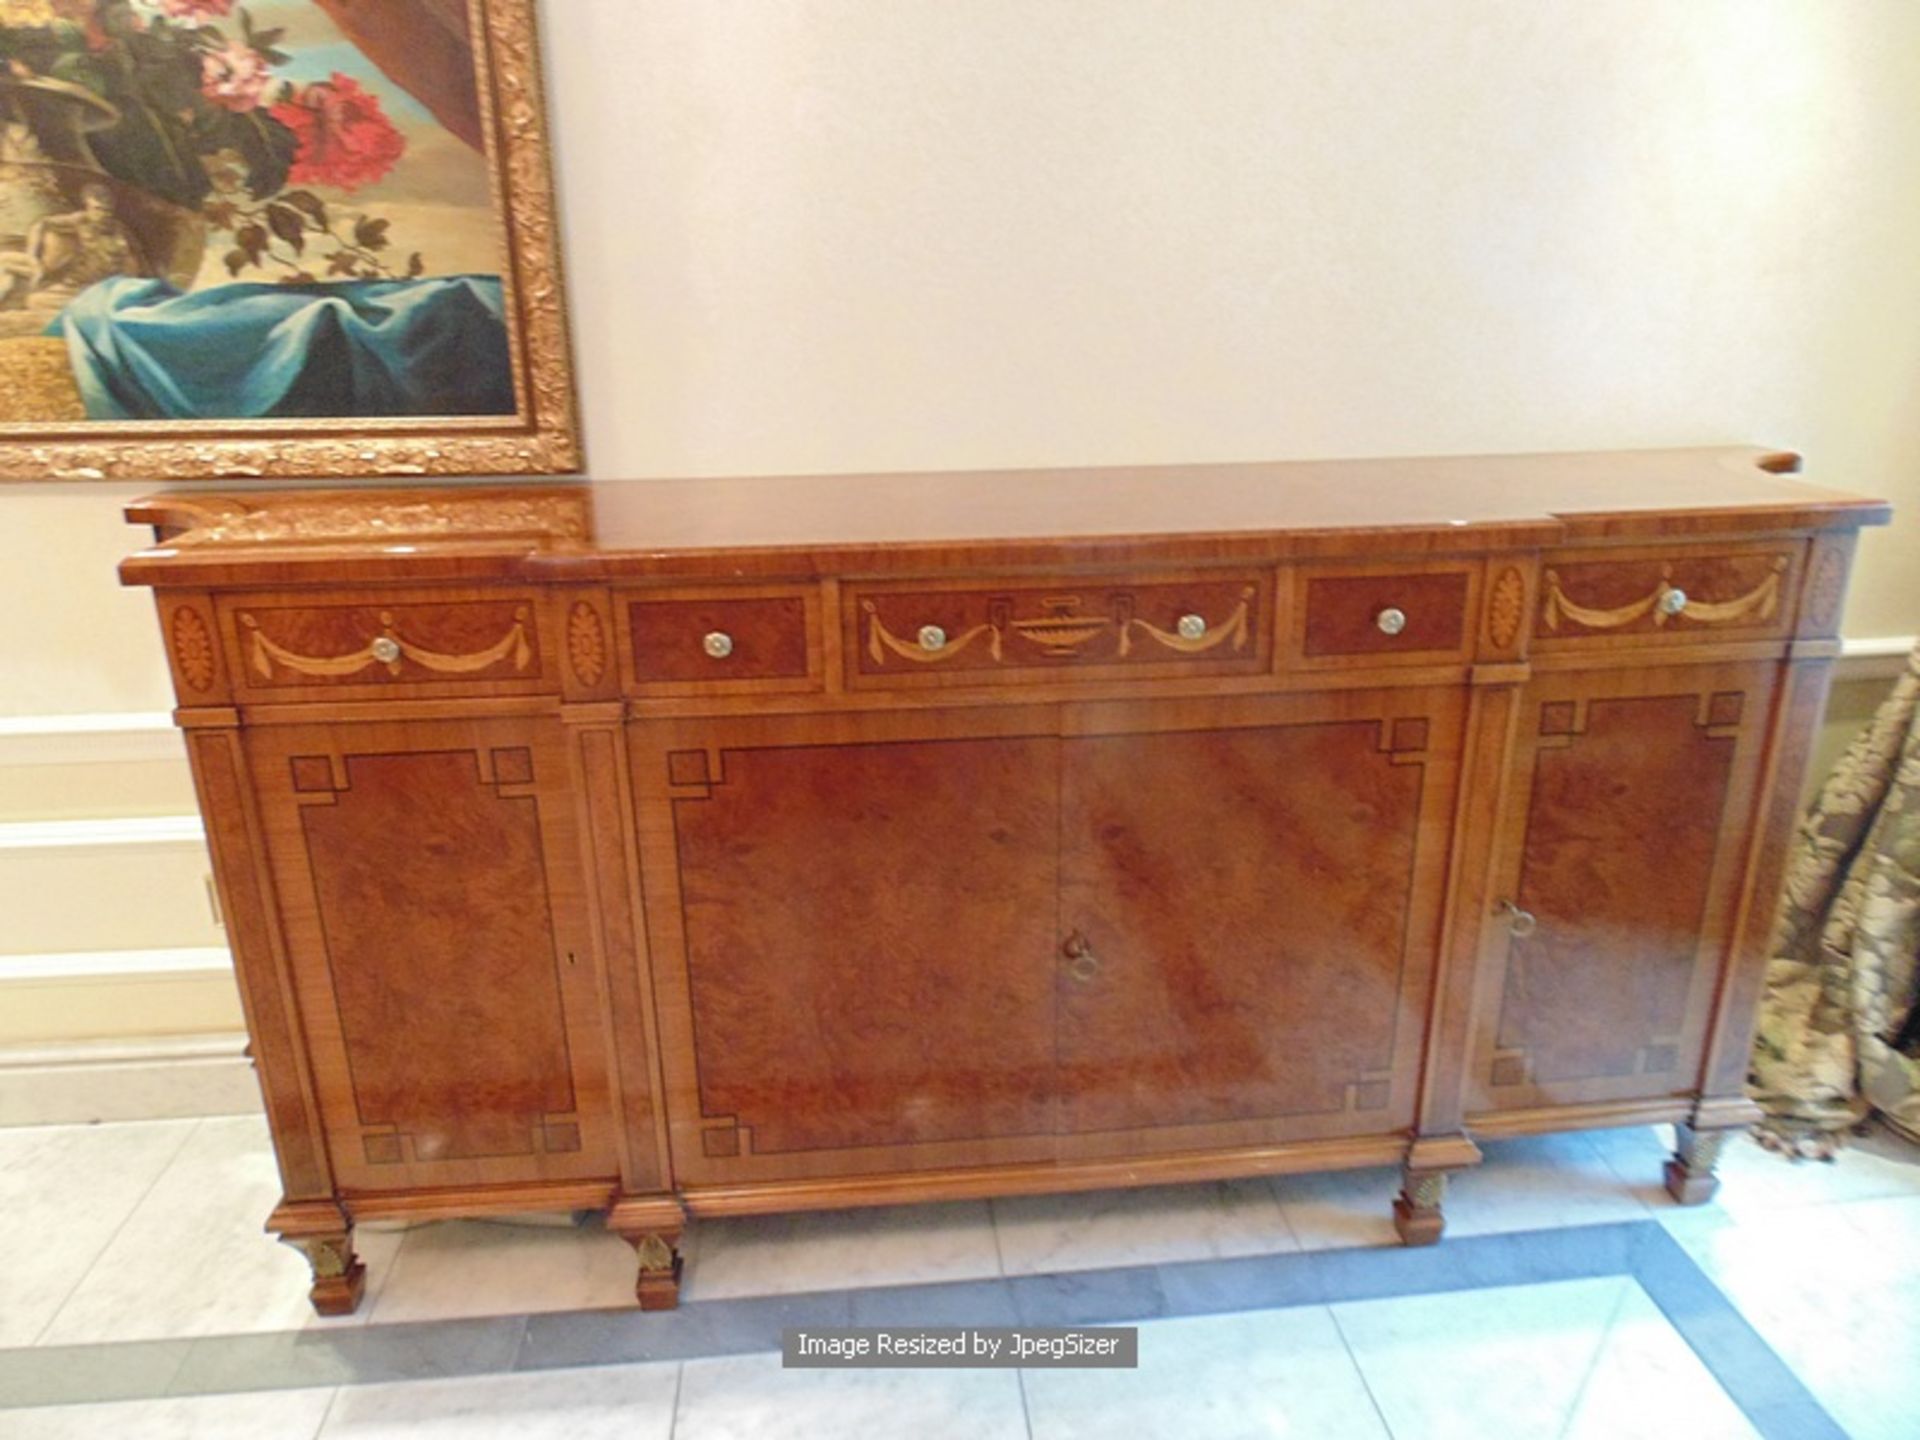 A burr mahogany breakfront sideboard in the French Empire style, with fluted quiver terminals, the